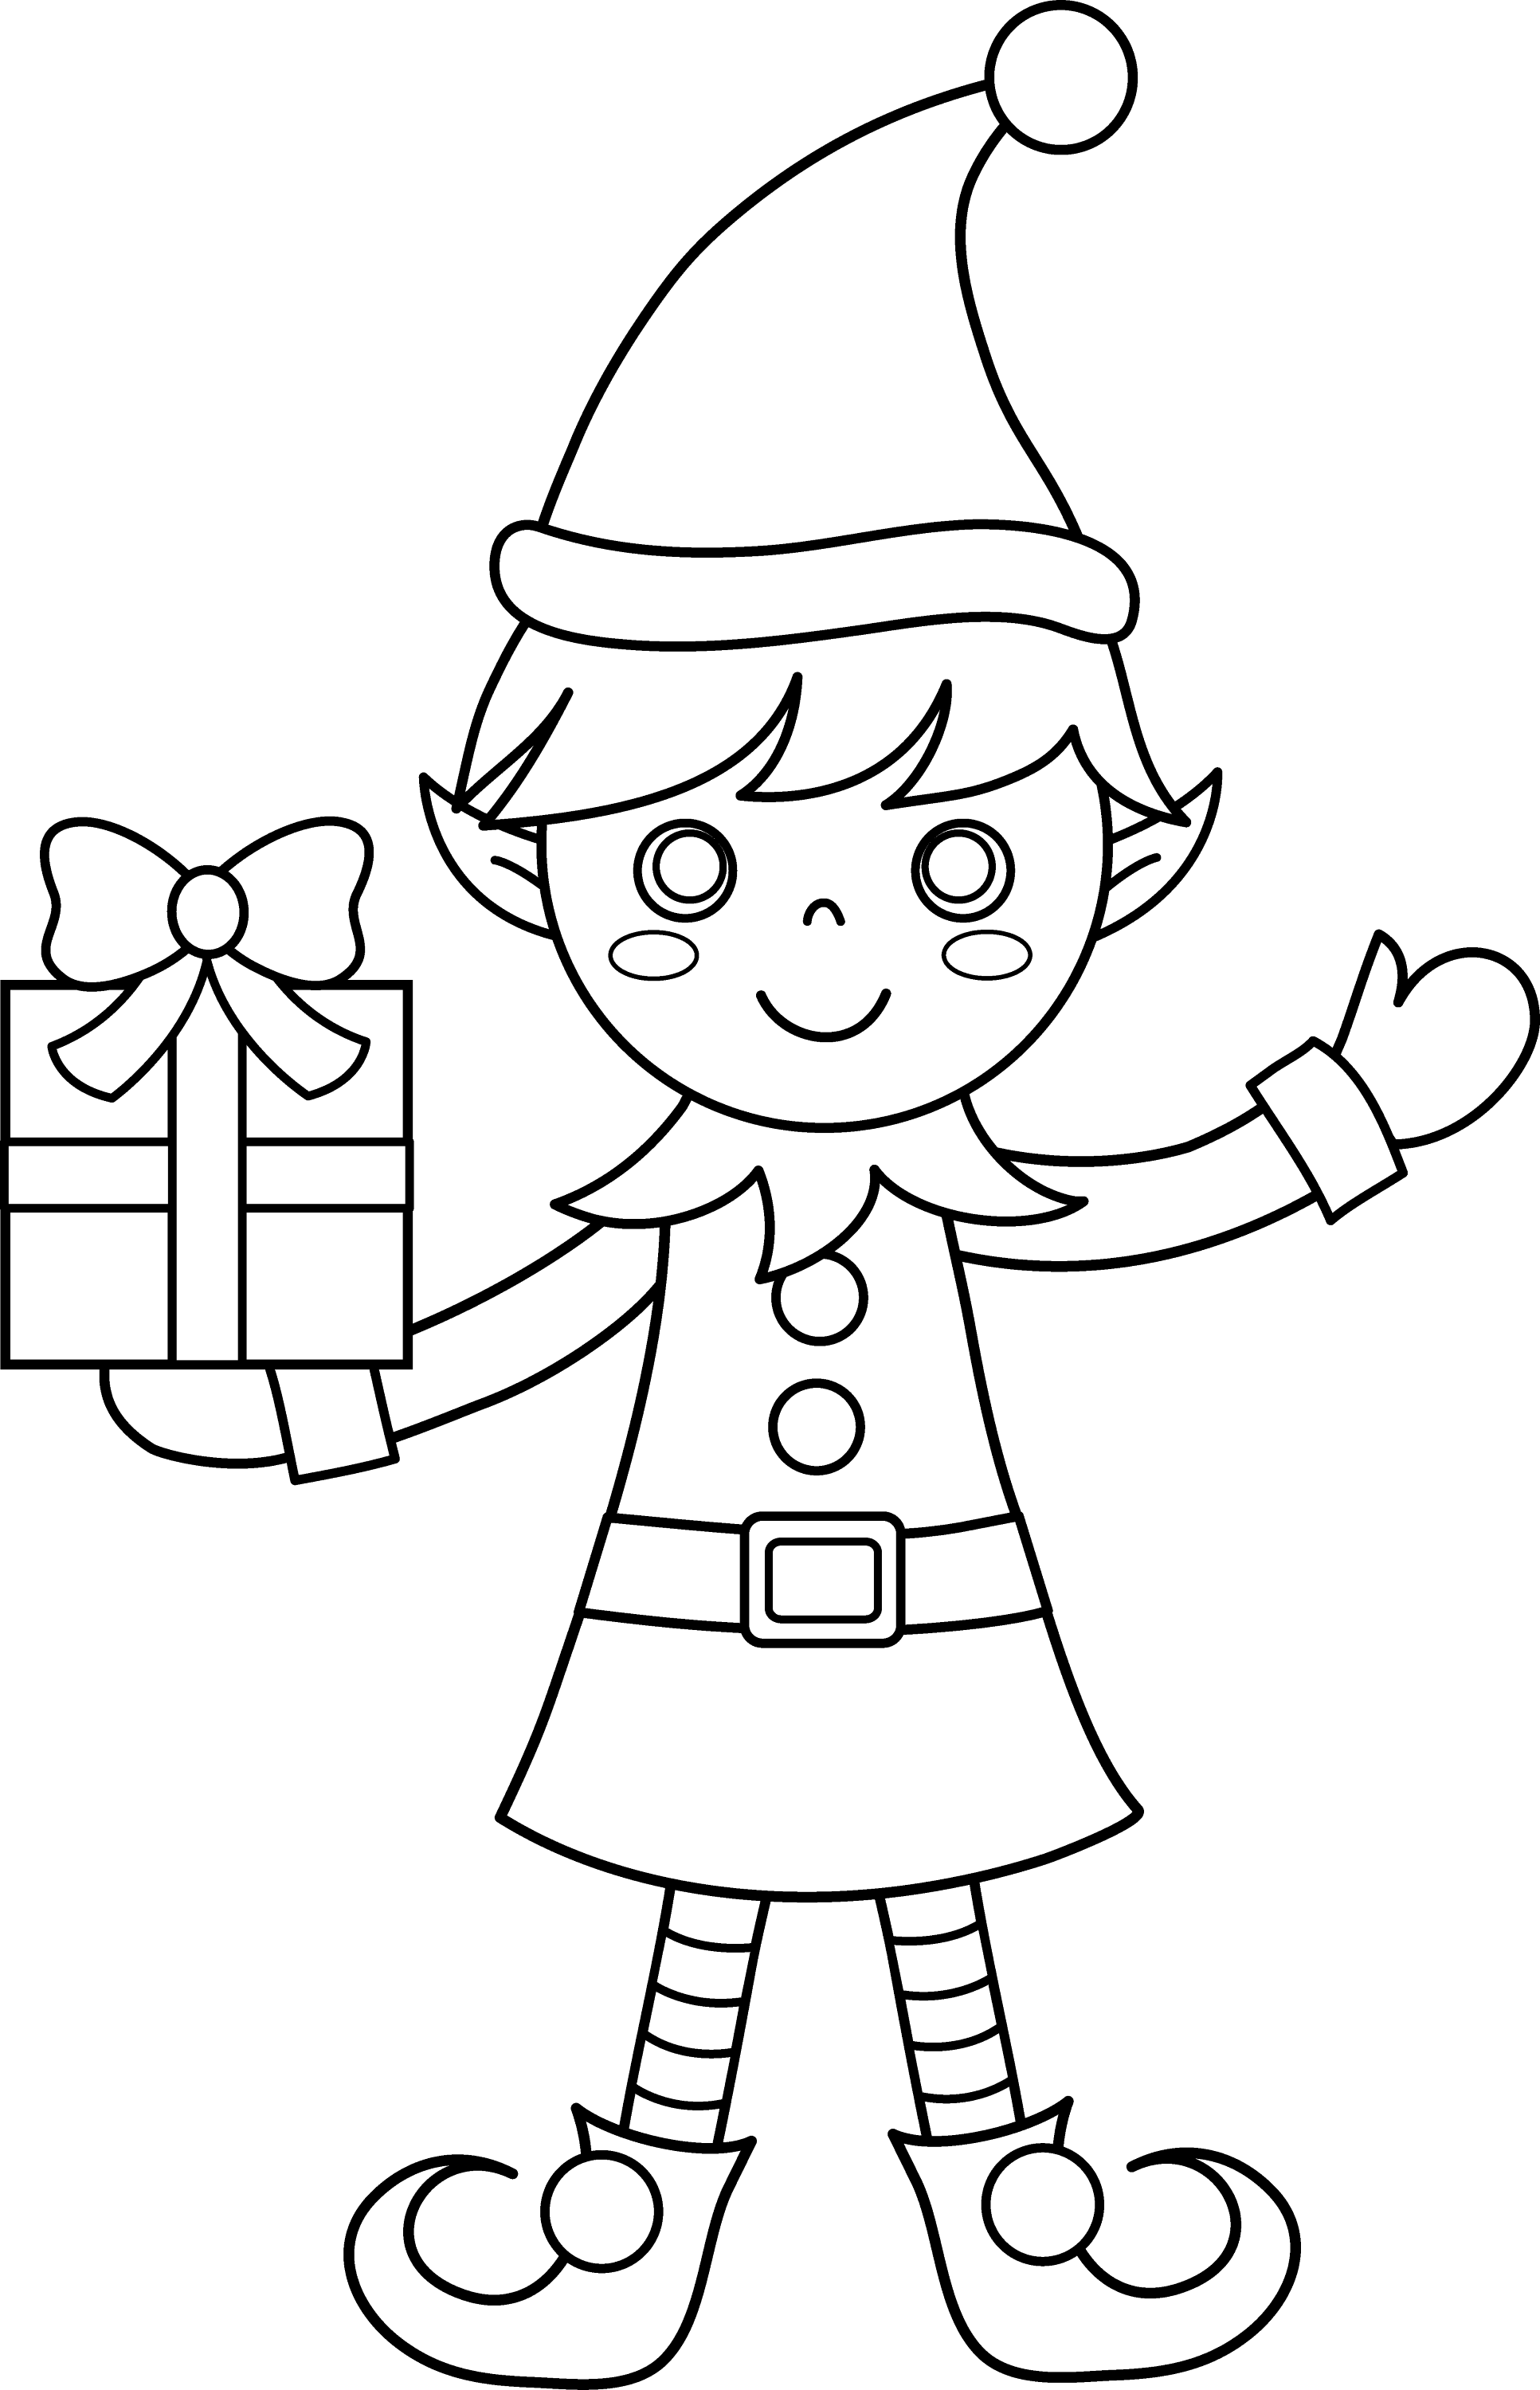 Christmas Elf Coloring Page - Free Clip Art